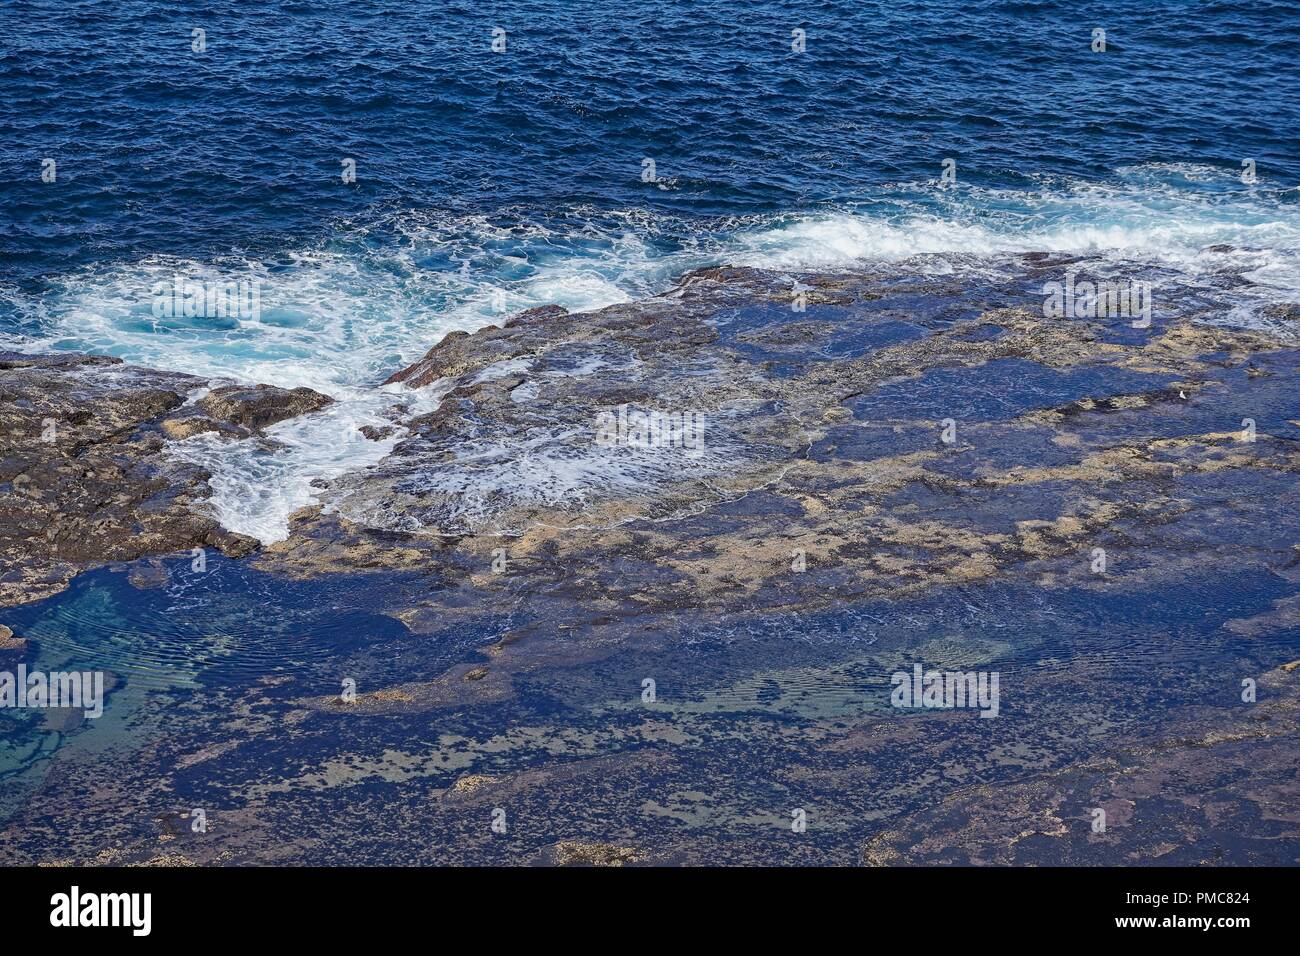 Rock shelf, rock pools and small waves, viewed from a cliff above. Stock Photo